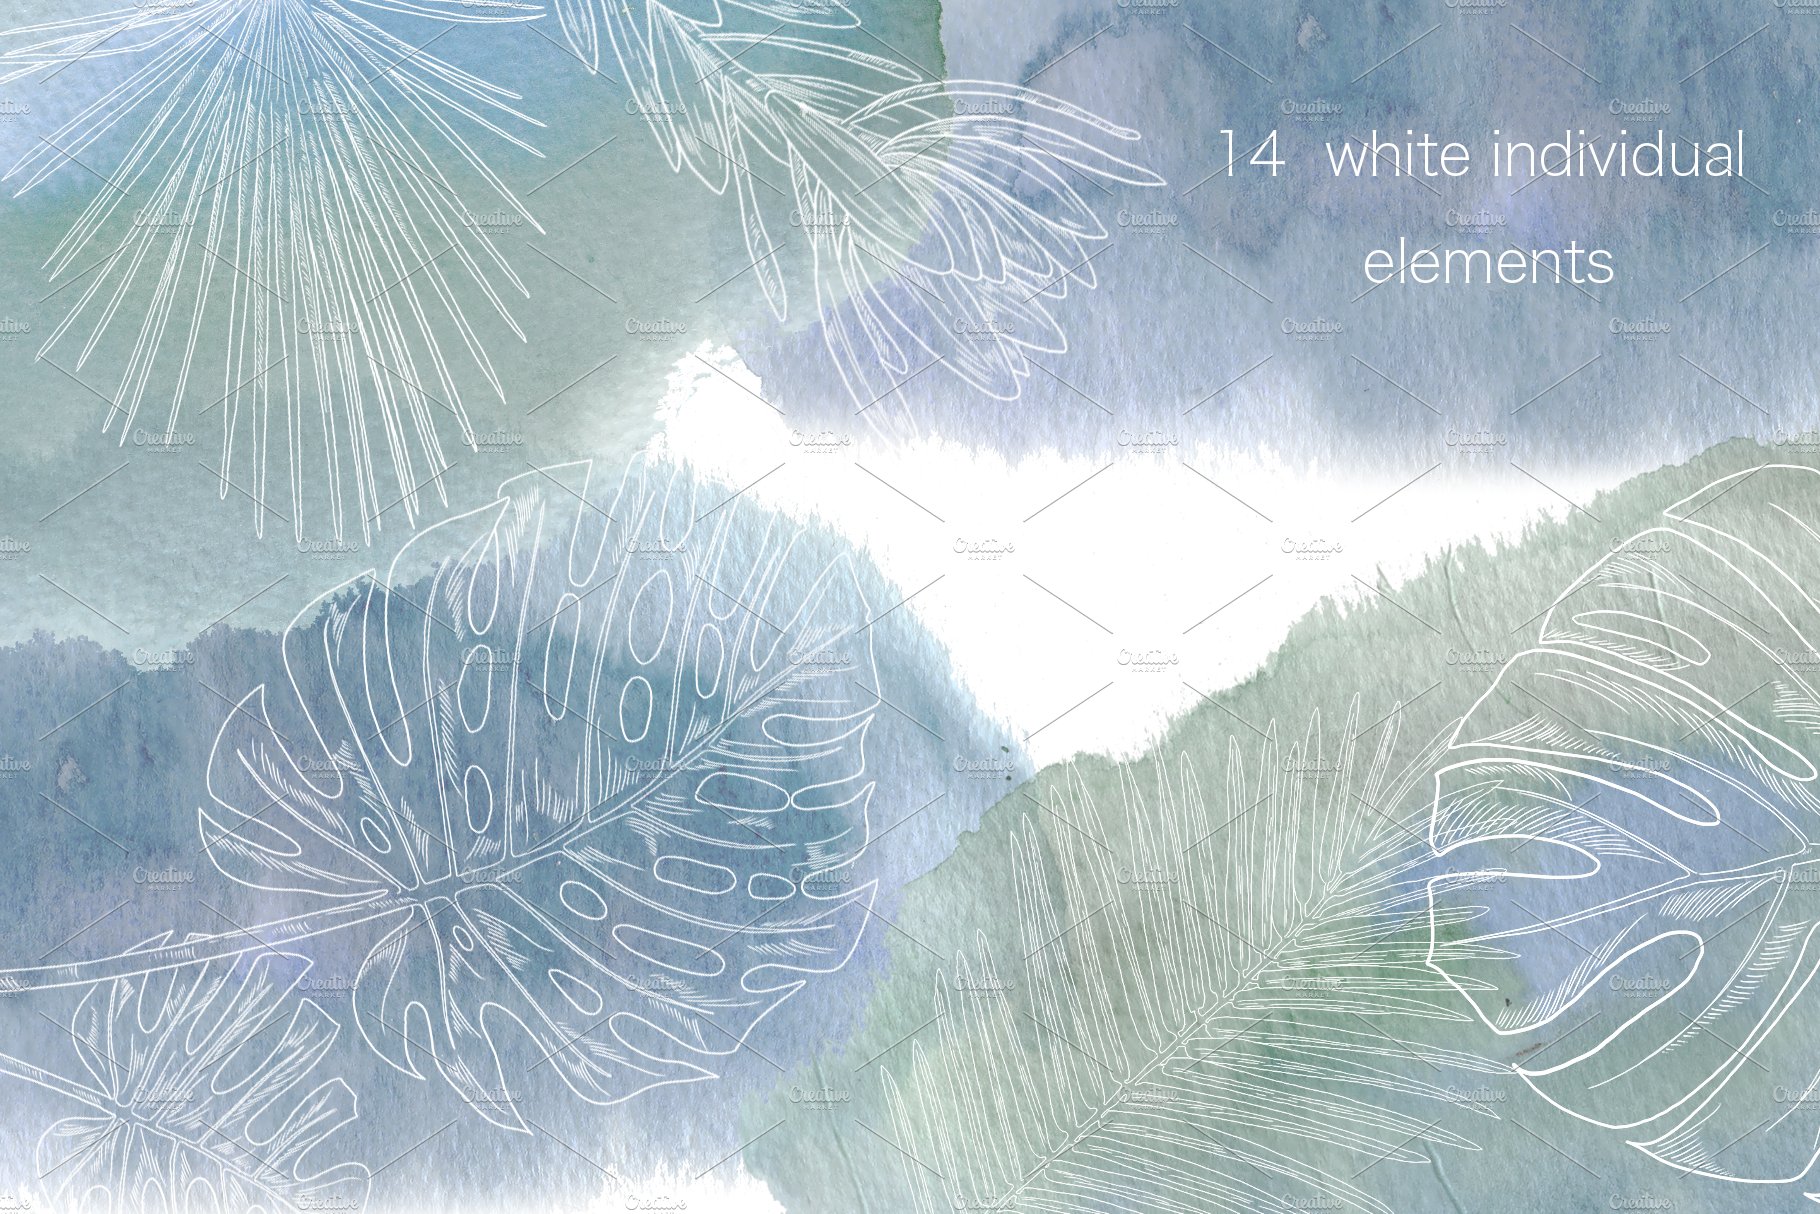 Watercolor painting of leaves with the words white individual elements.